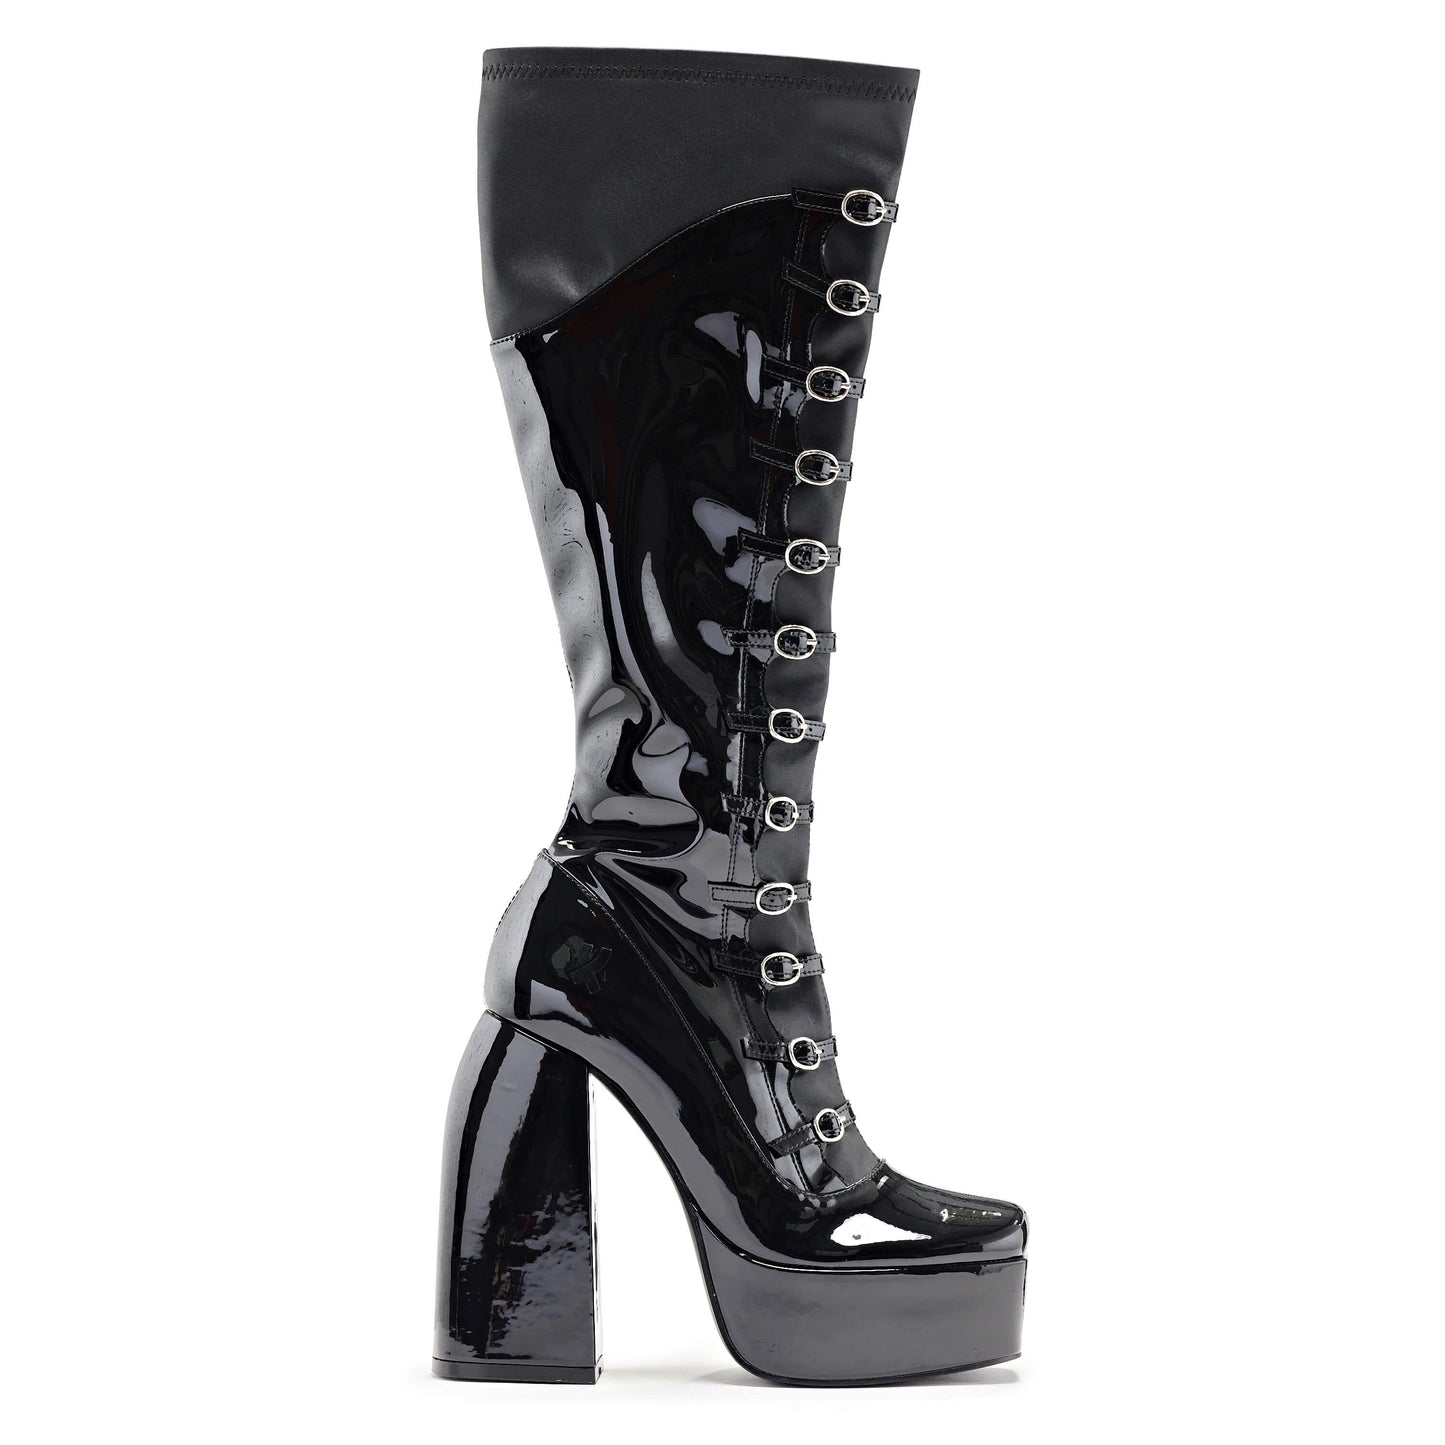 Ritual State Patent Long Boots - Black - Long Boots - KOI Footwear - Black - Side View